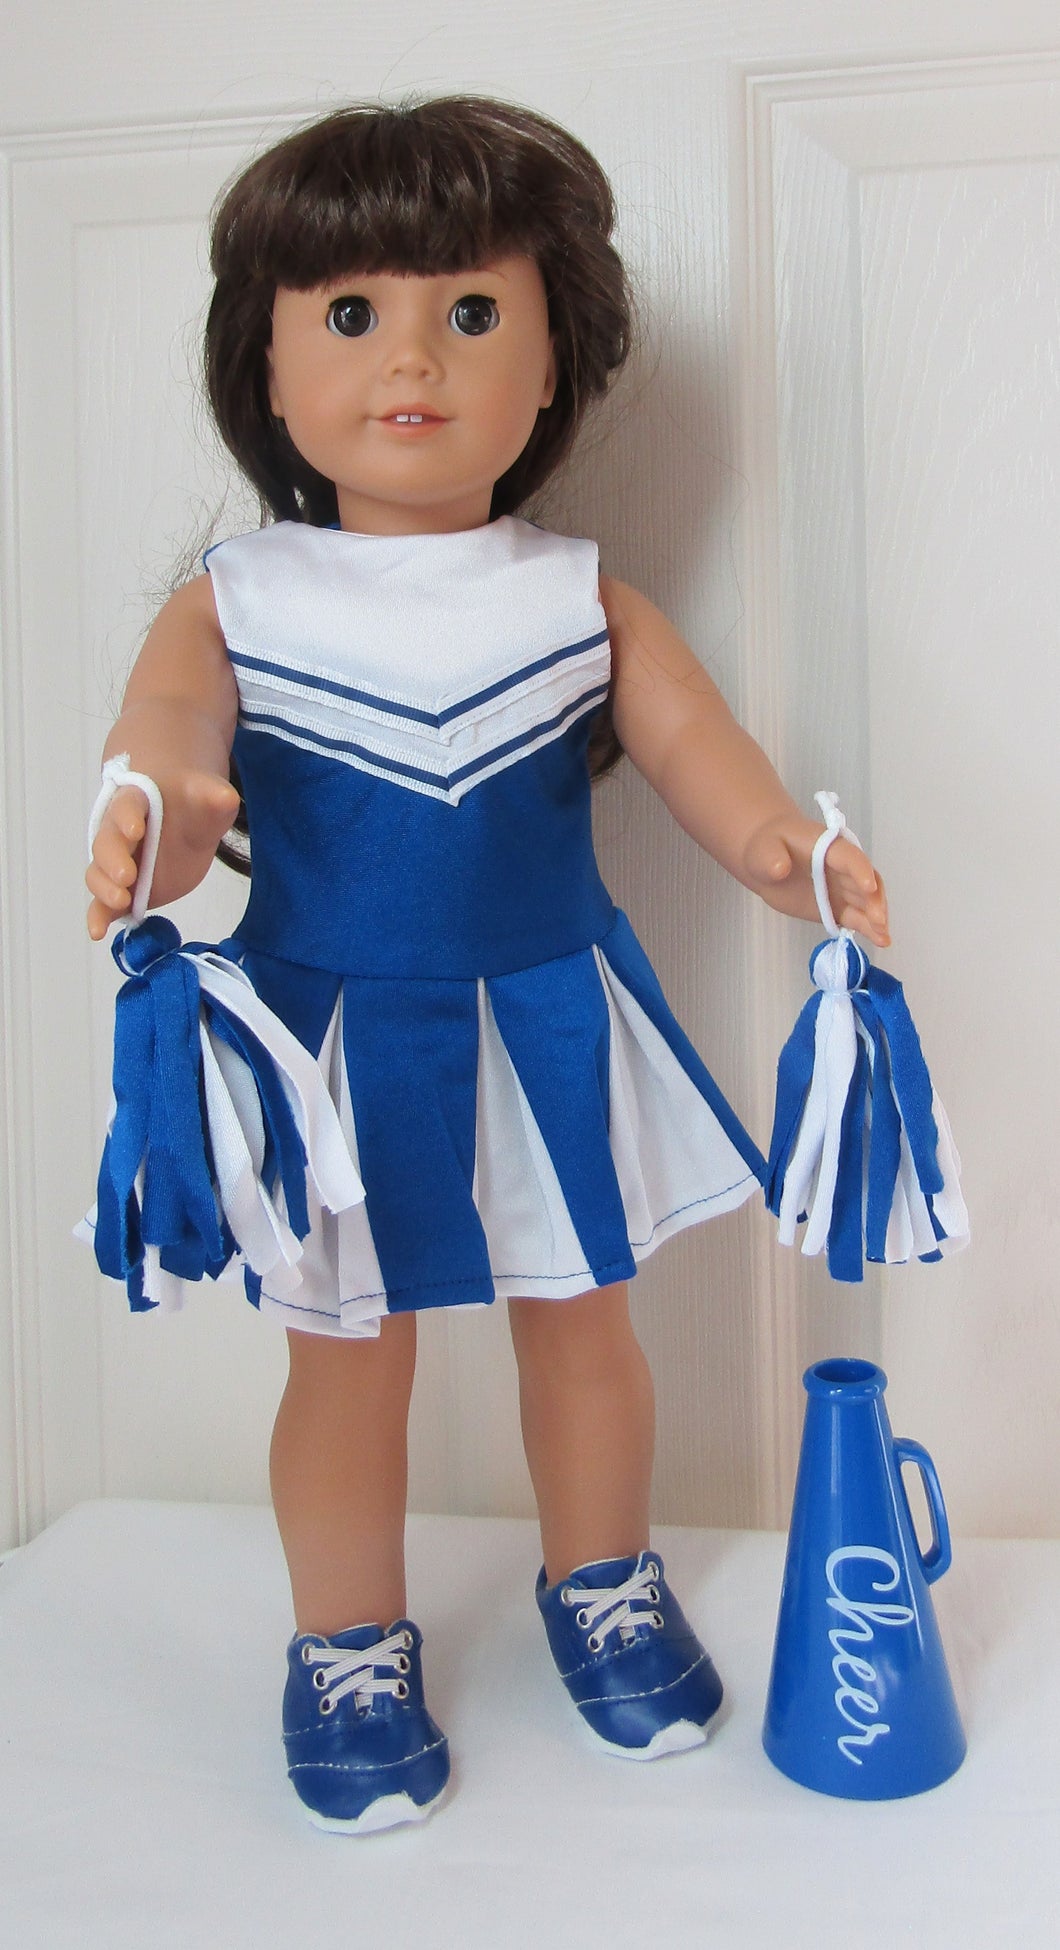 Cheer 5 Pc Outfit: Blue